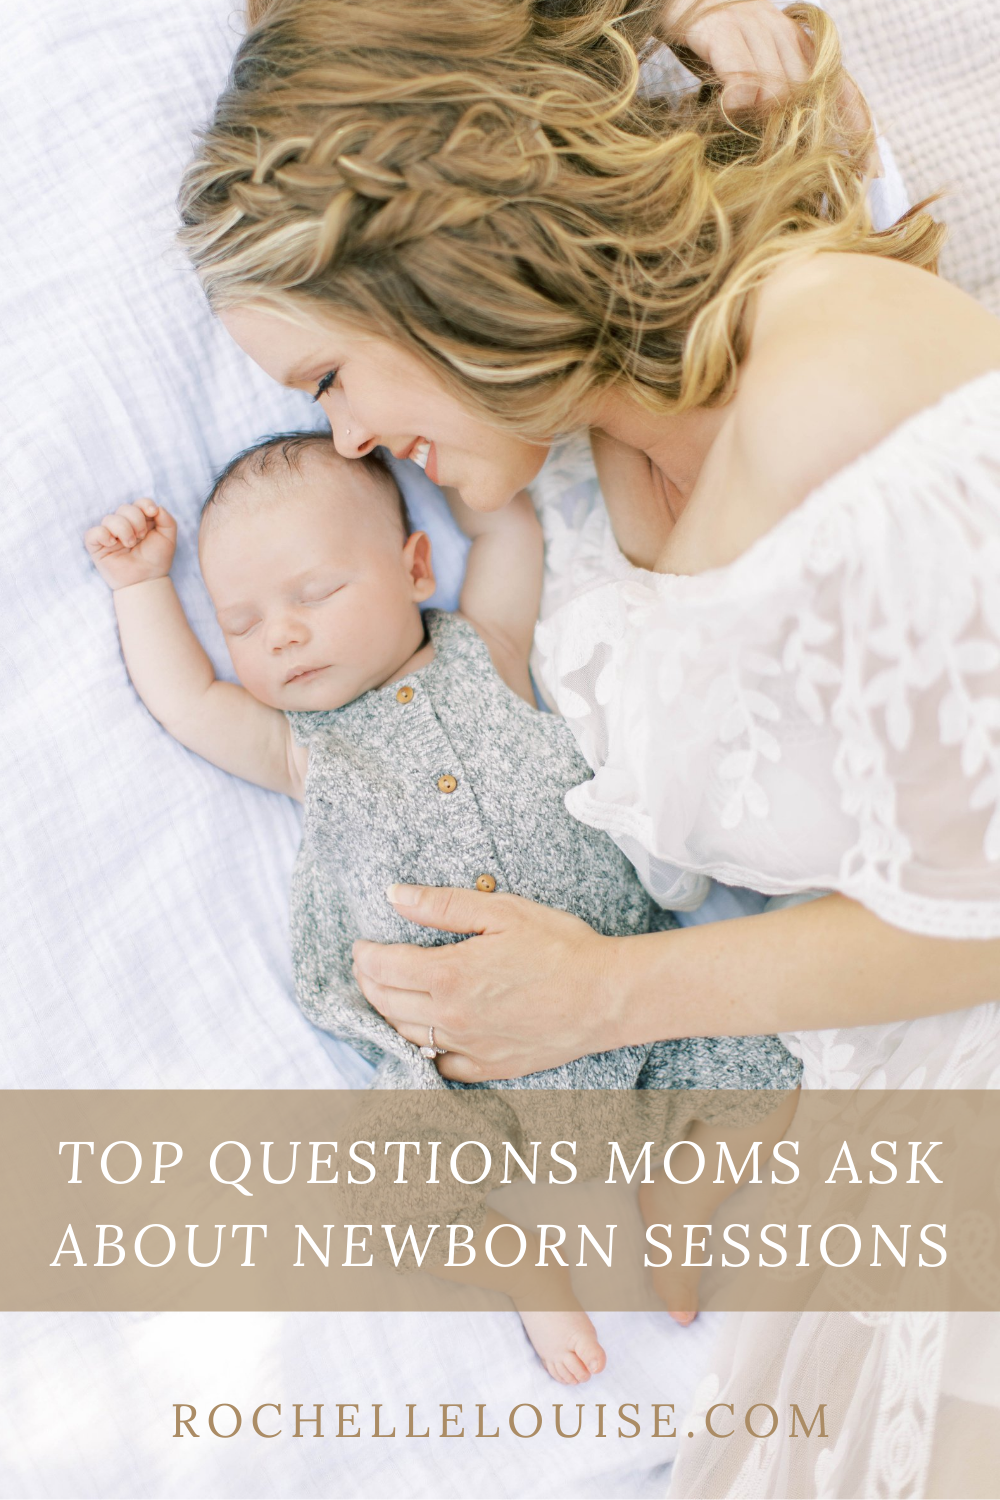 Top Questions moms ask about newborn sessions